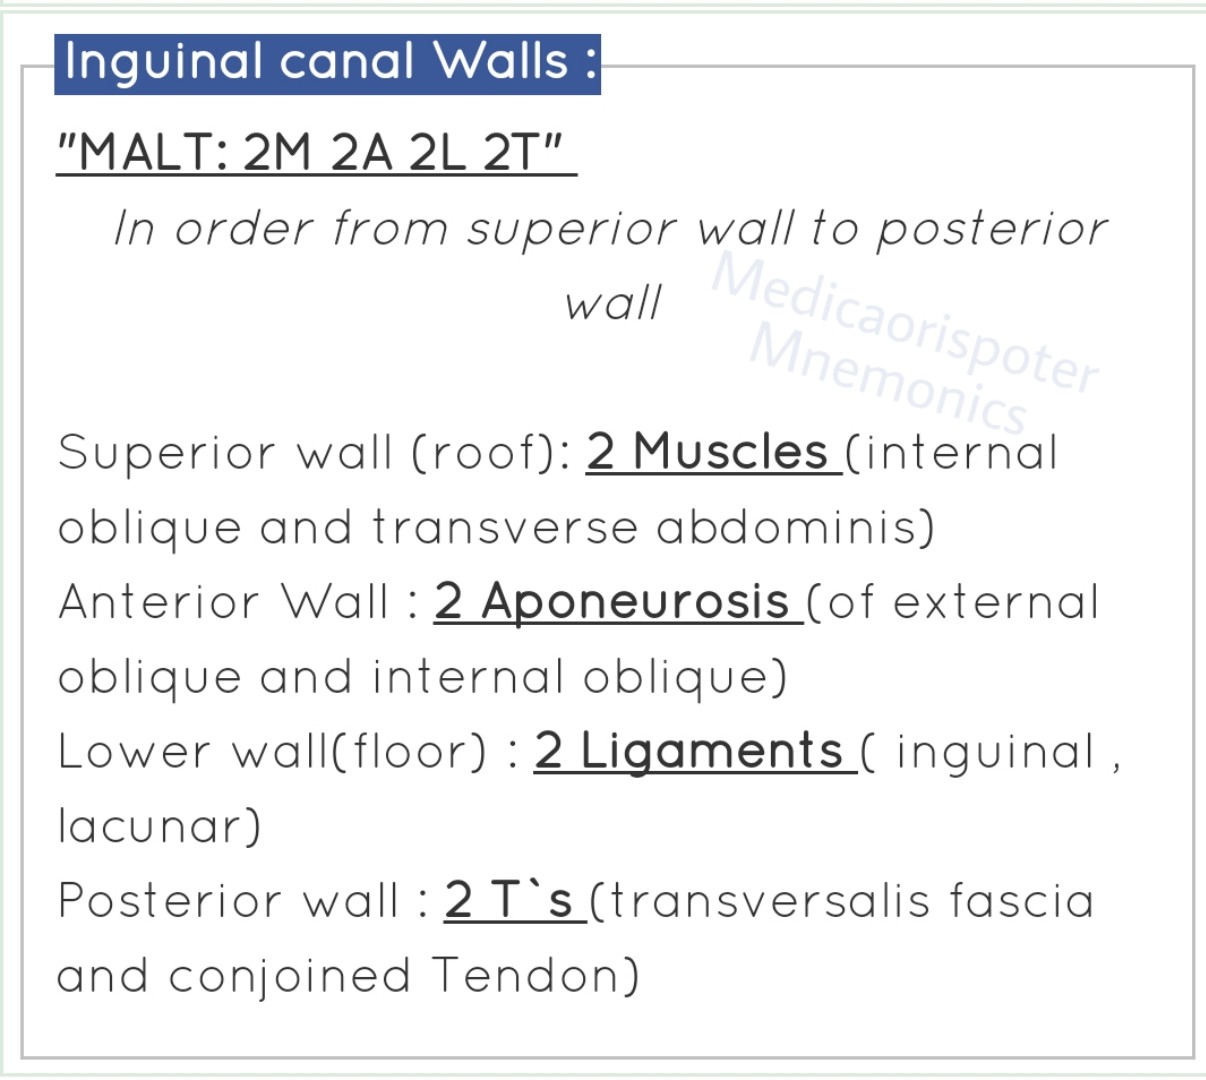 Walls of Inguinal Canal